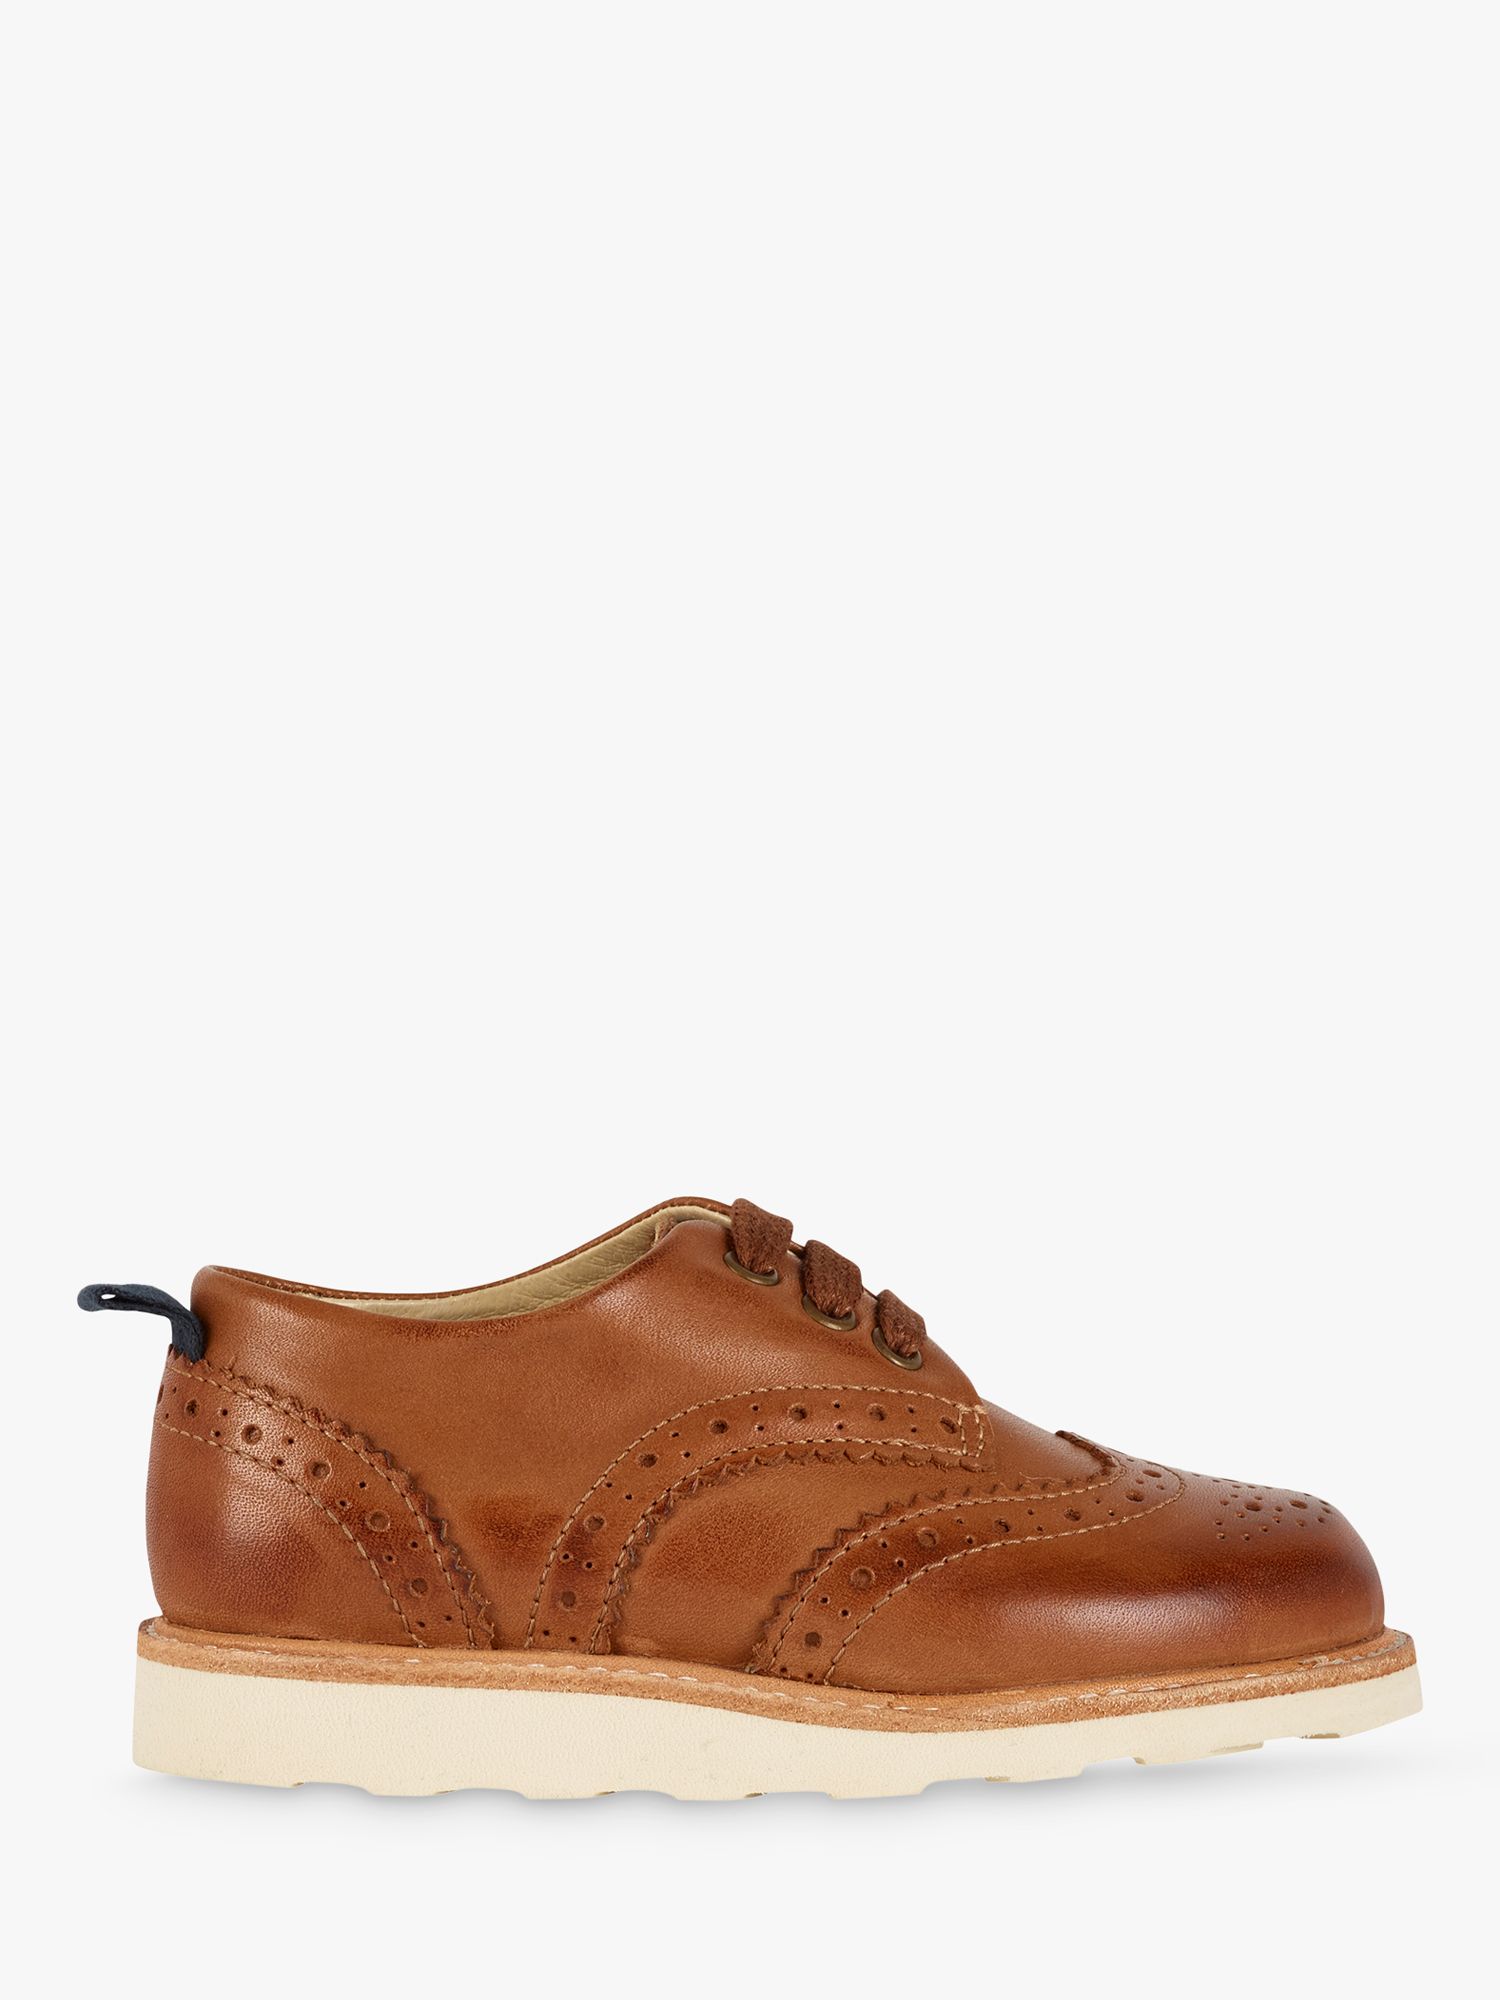 Young Soles Kids' Brando Leather Brogues, Tan at John Lewis & Partners